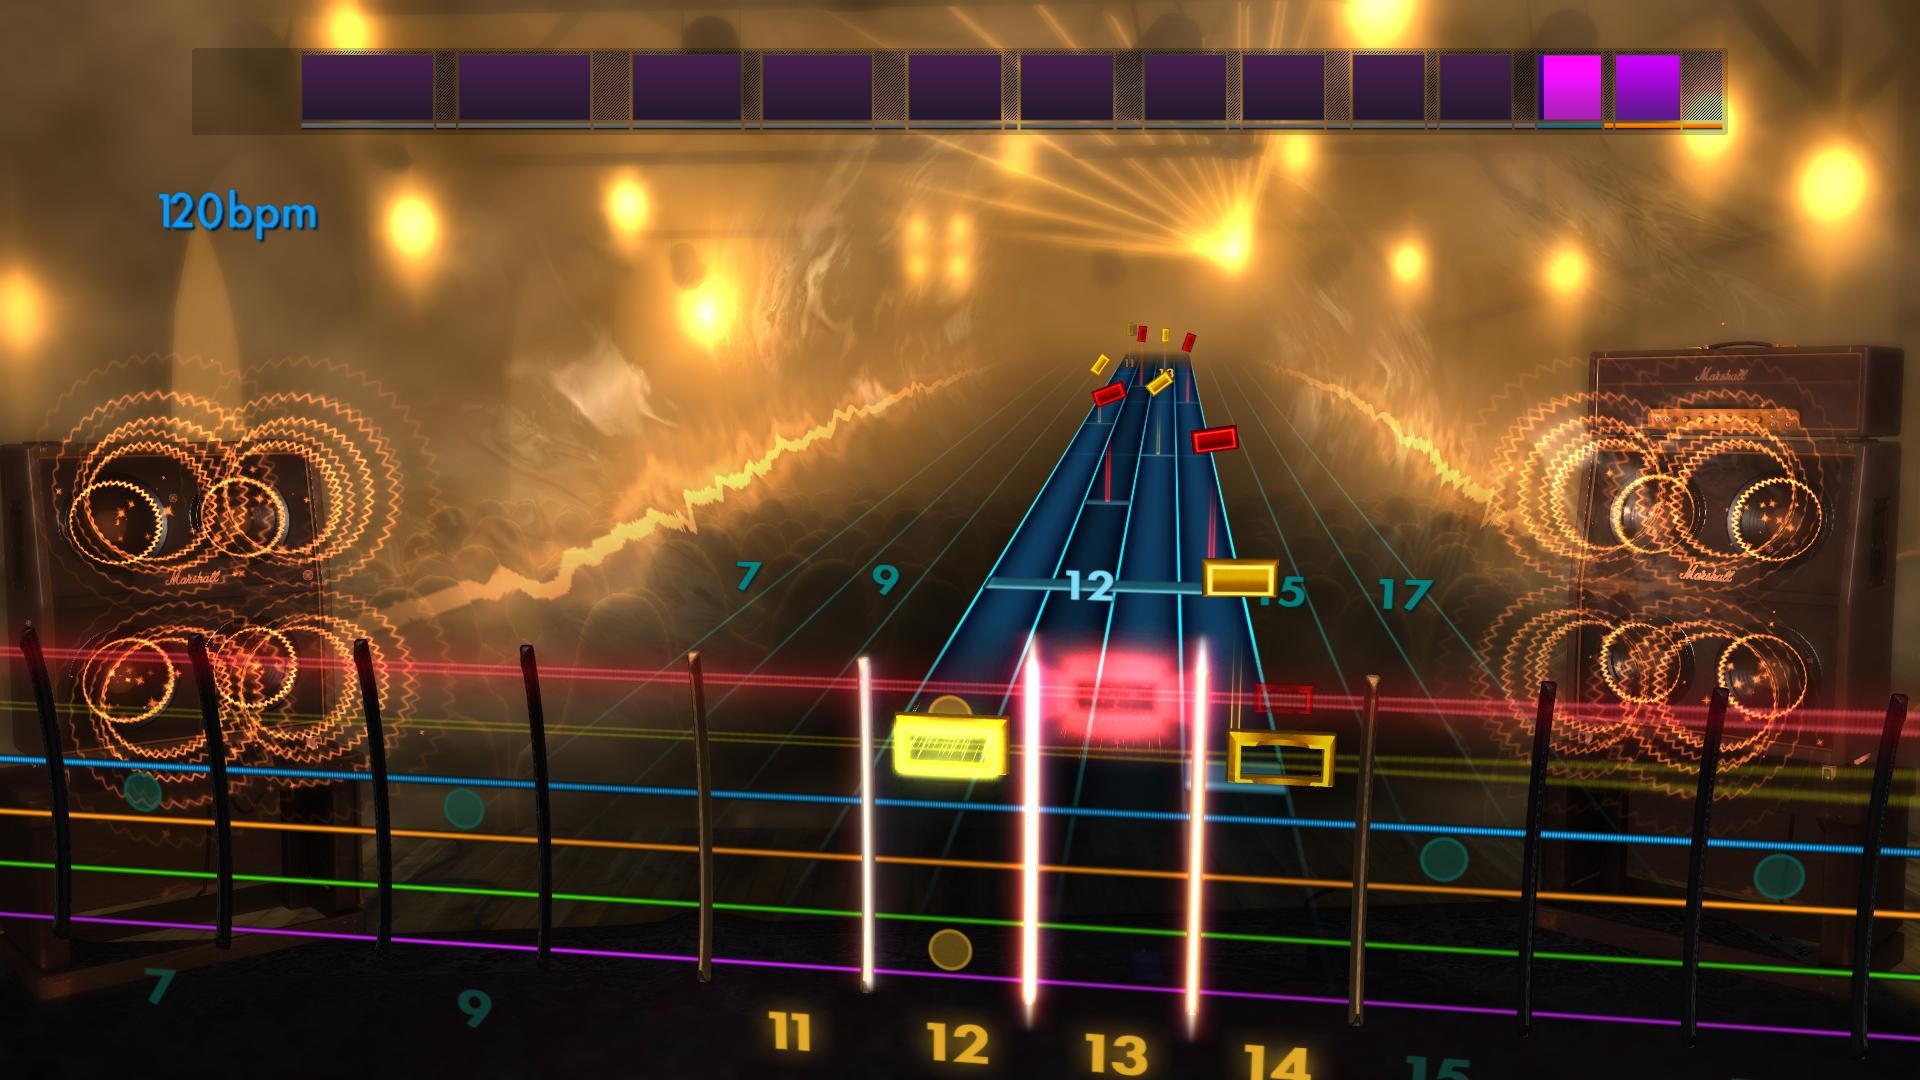 rocksmith 2014 patch download